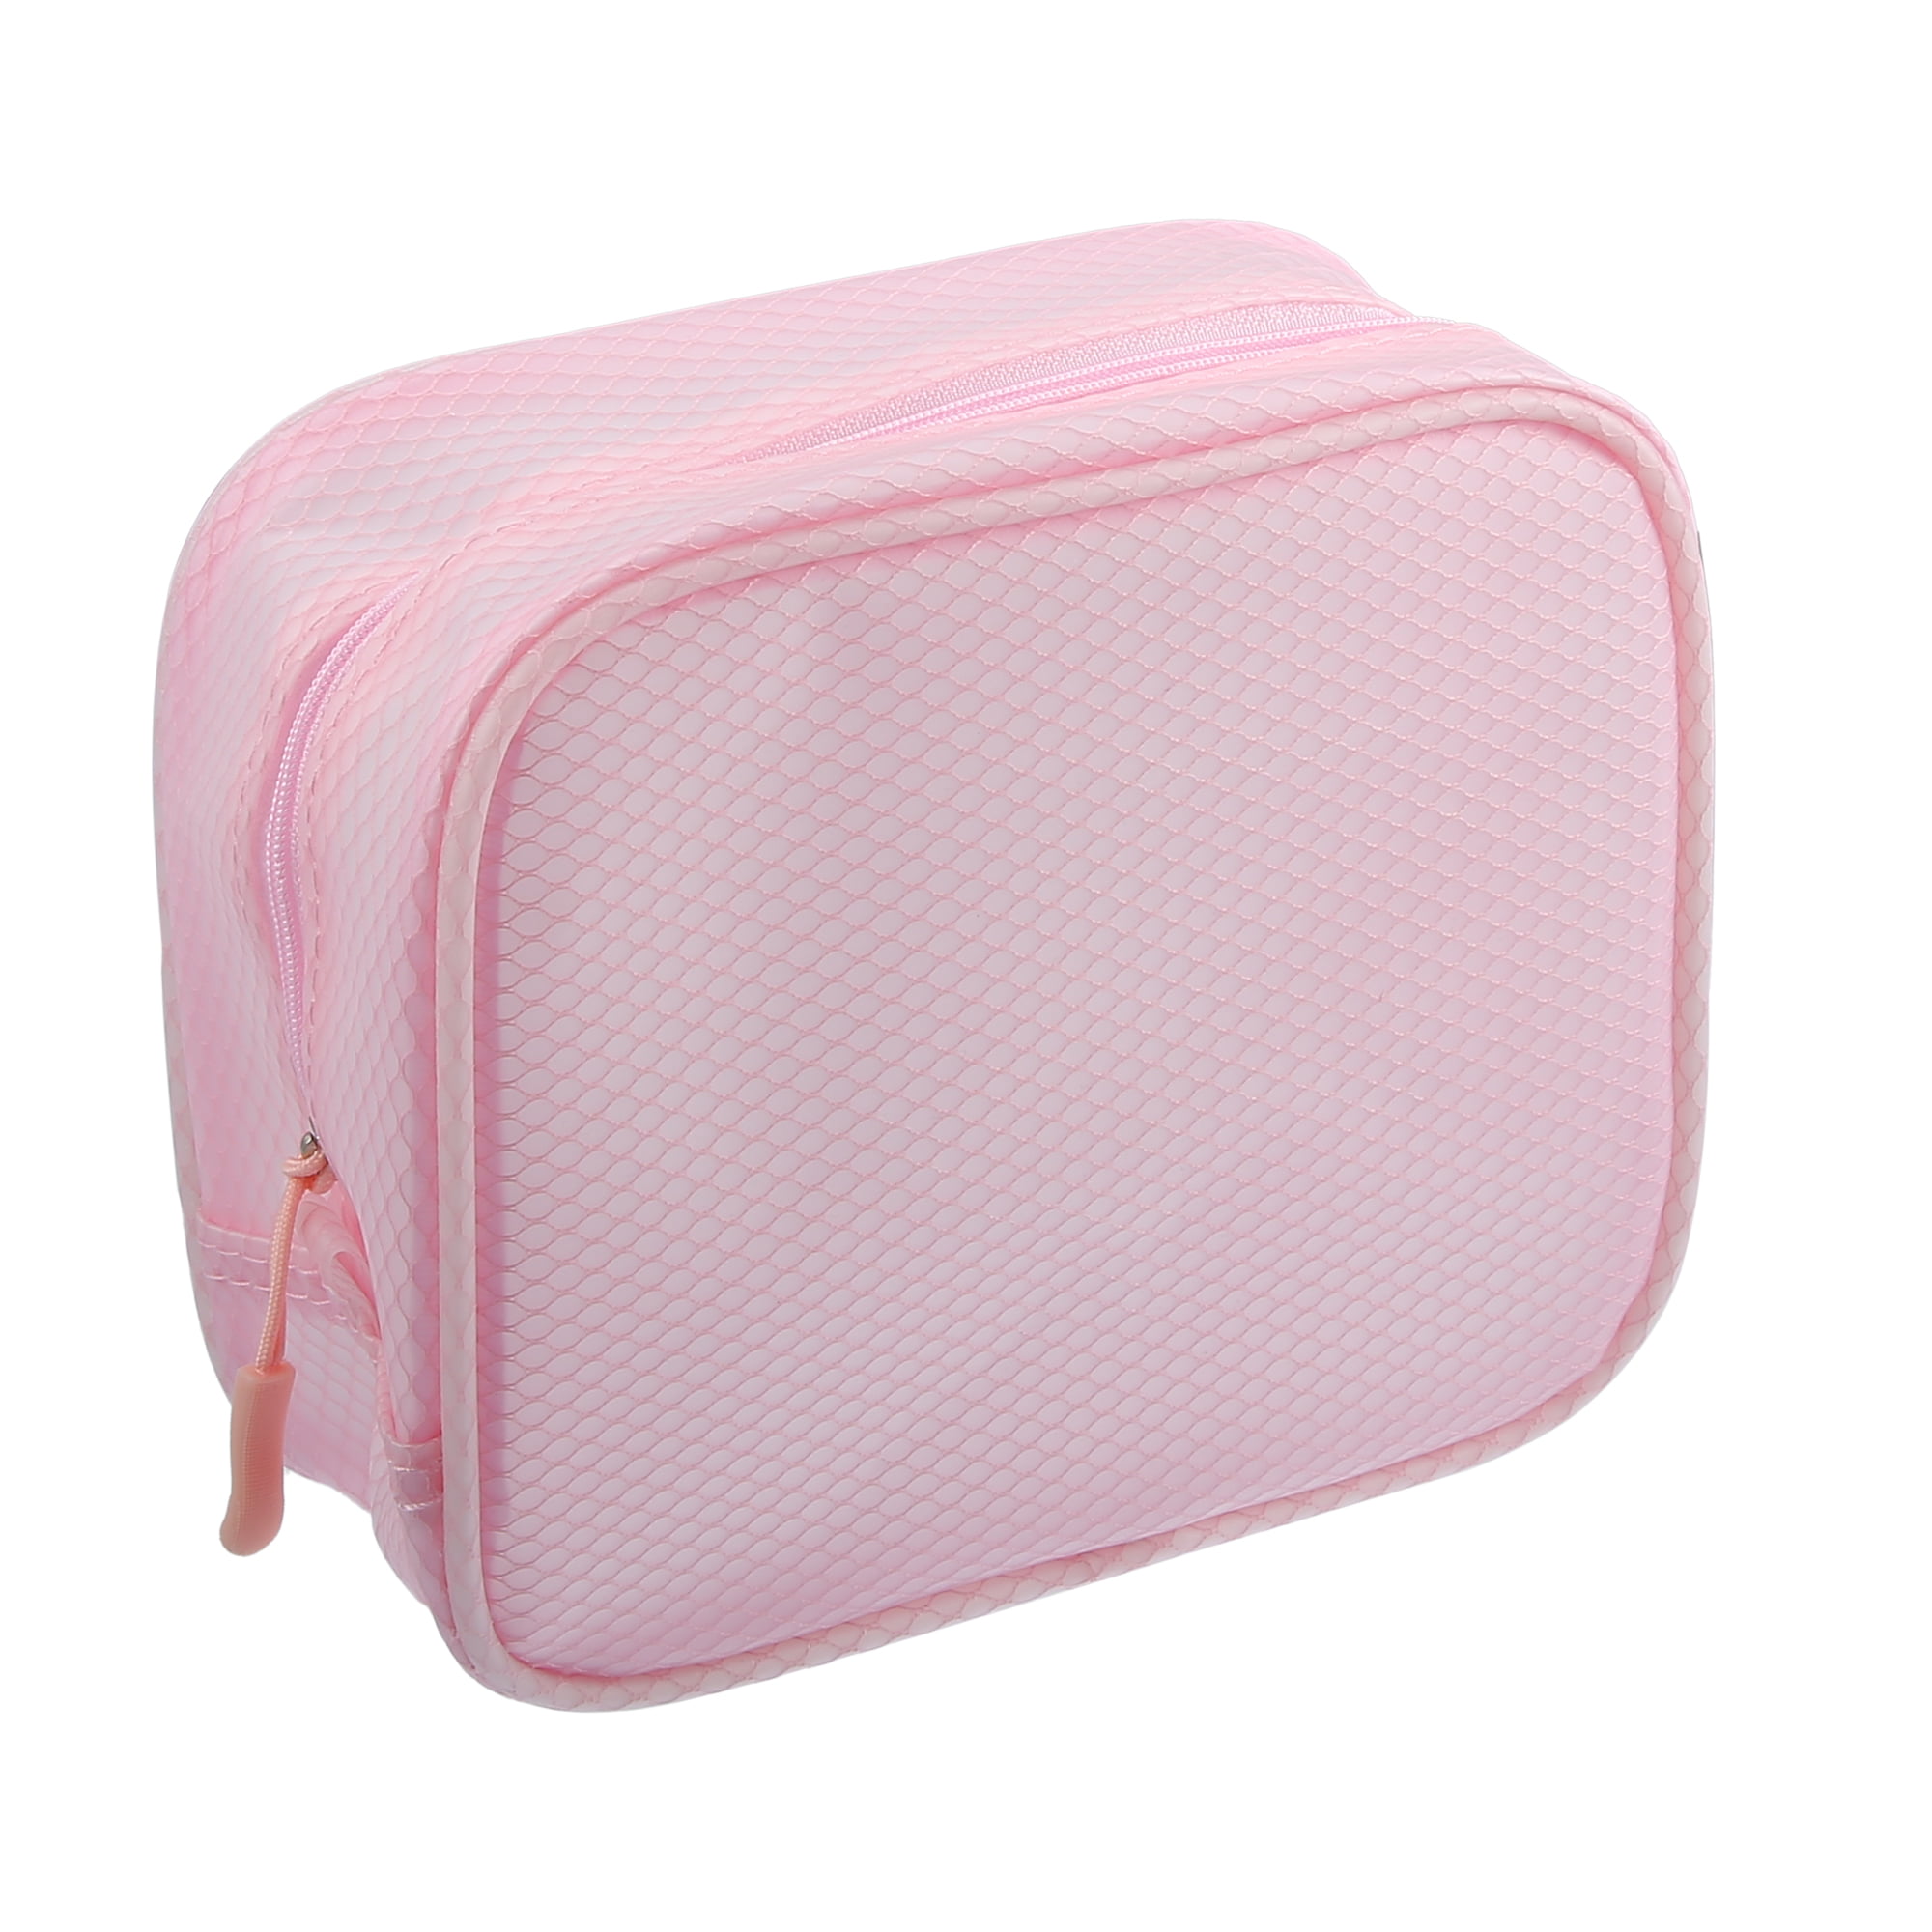 Unique Bargains Small Makeup Pouch Mini Makeup Bag Travel Pouch for Coin  Purse Make Up Organizer Cosmetic Zipper Pink 